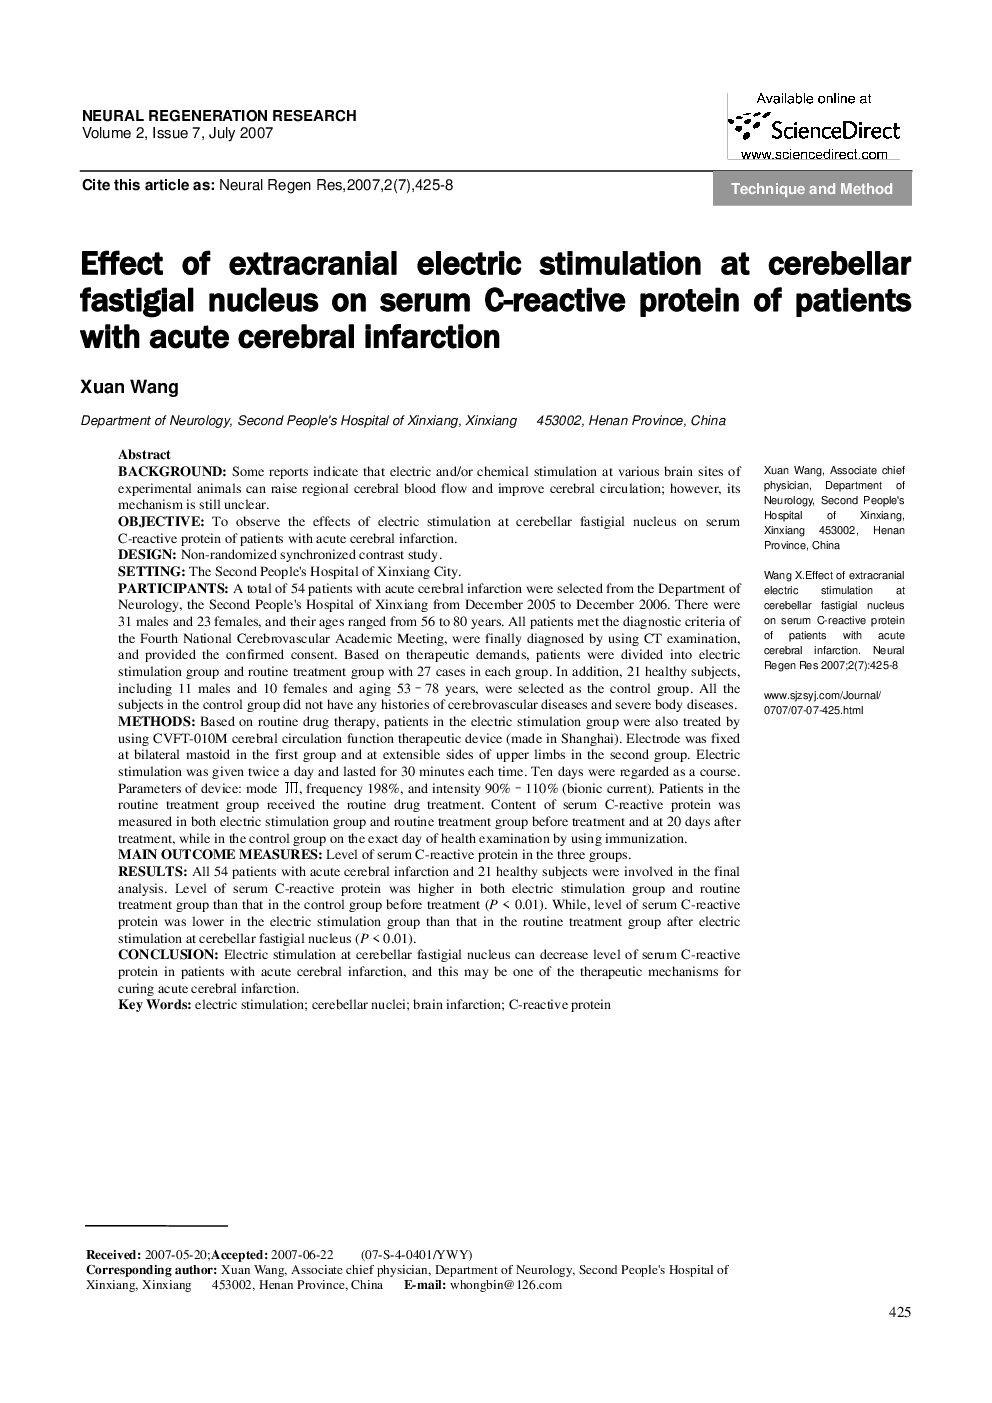 Effect of extracranial electric stimulation at cerebellar fastigial nucleus on serum C-reactive protein of patients with acute cerebral infarction